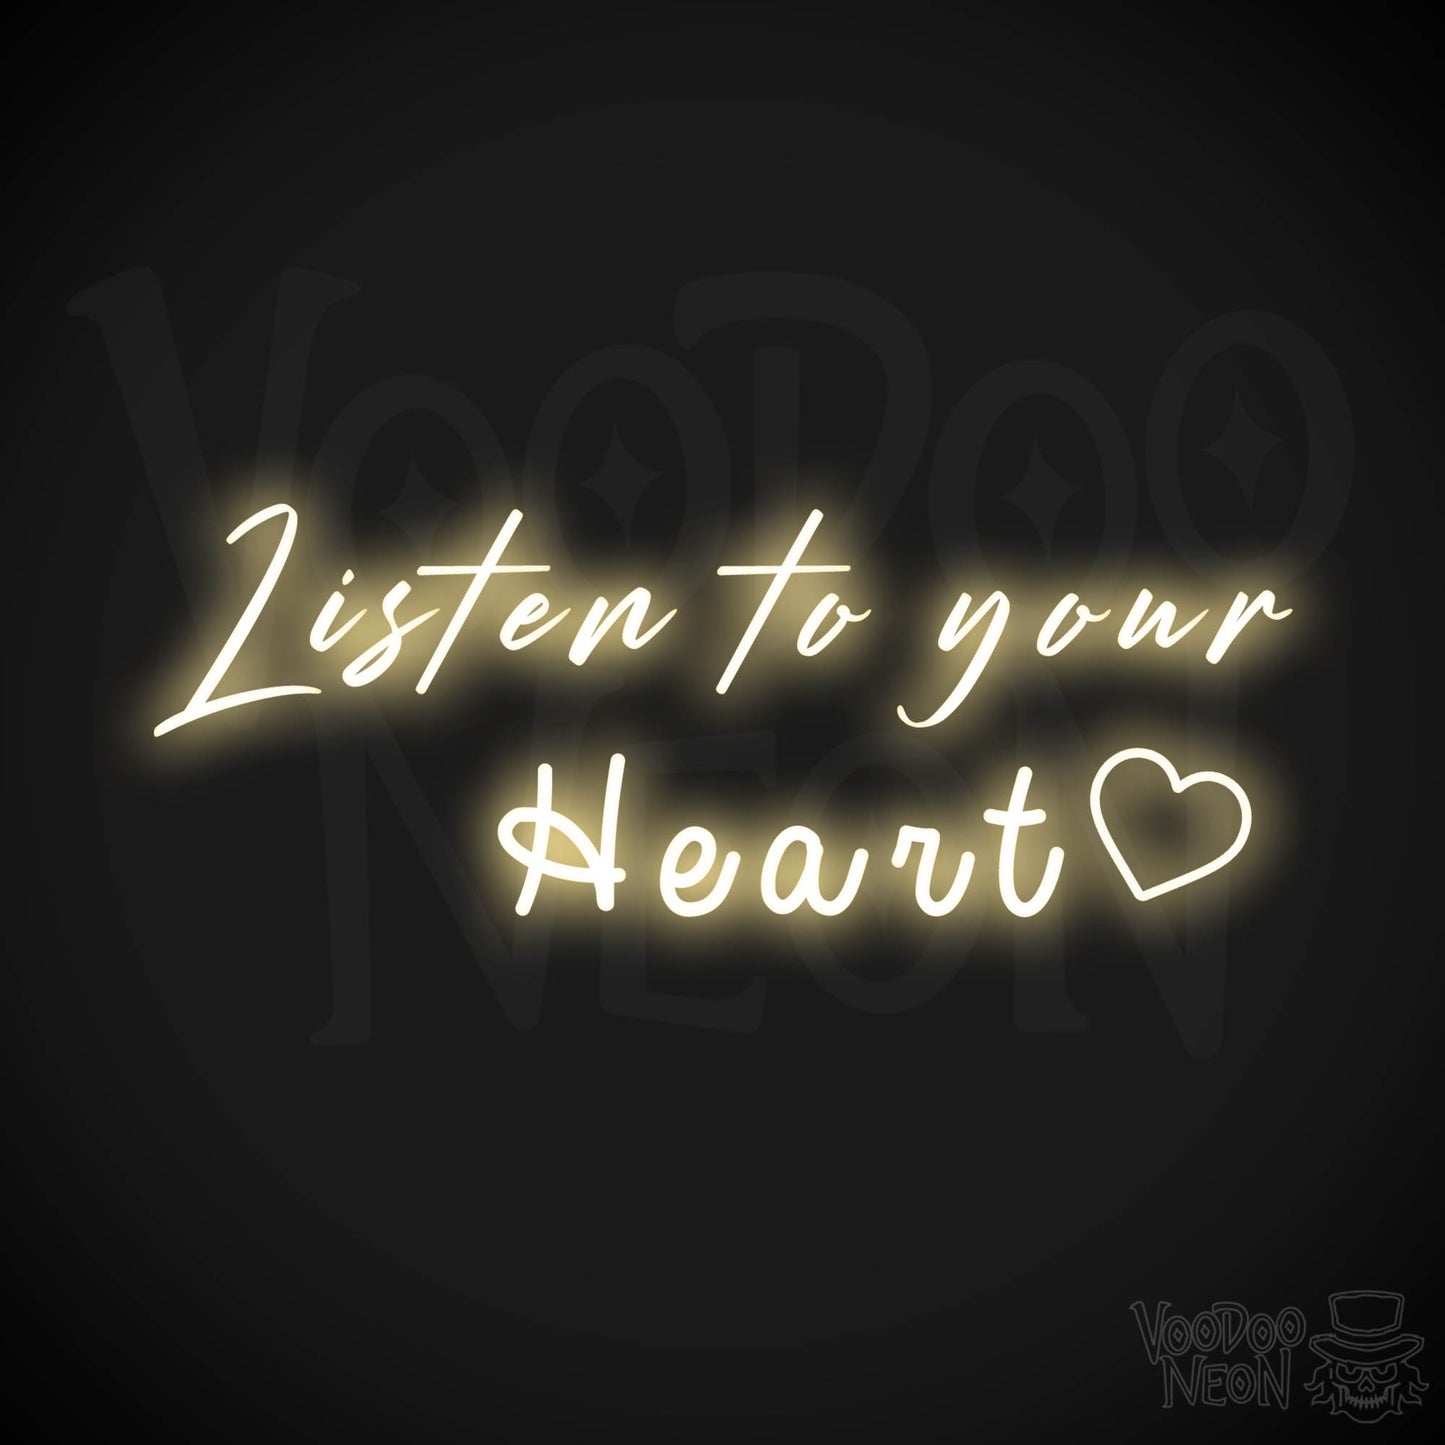 Listen To Your Heart Neon Sign - Neon Listen To Your Heart Sign - Wedding Sign - Color Warm White